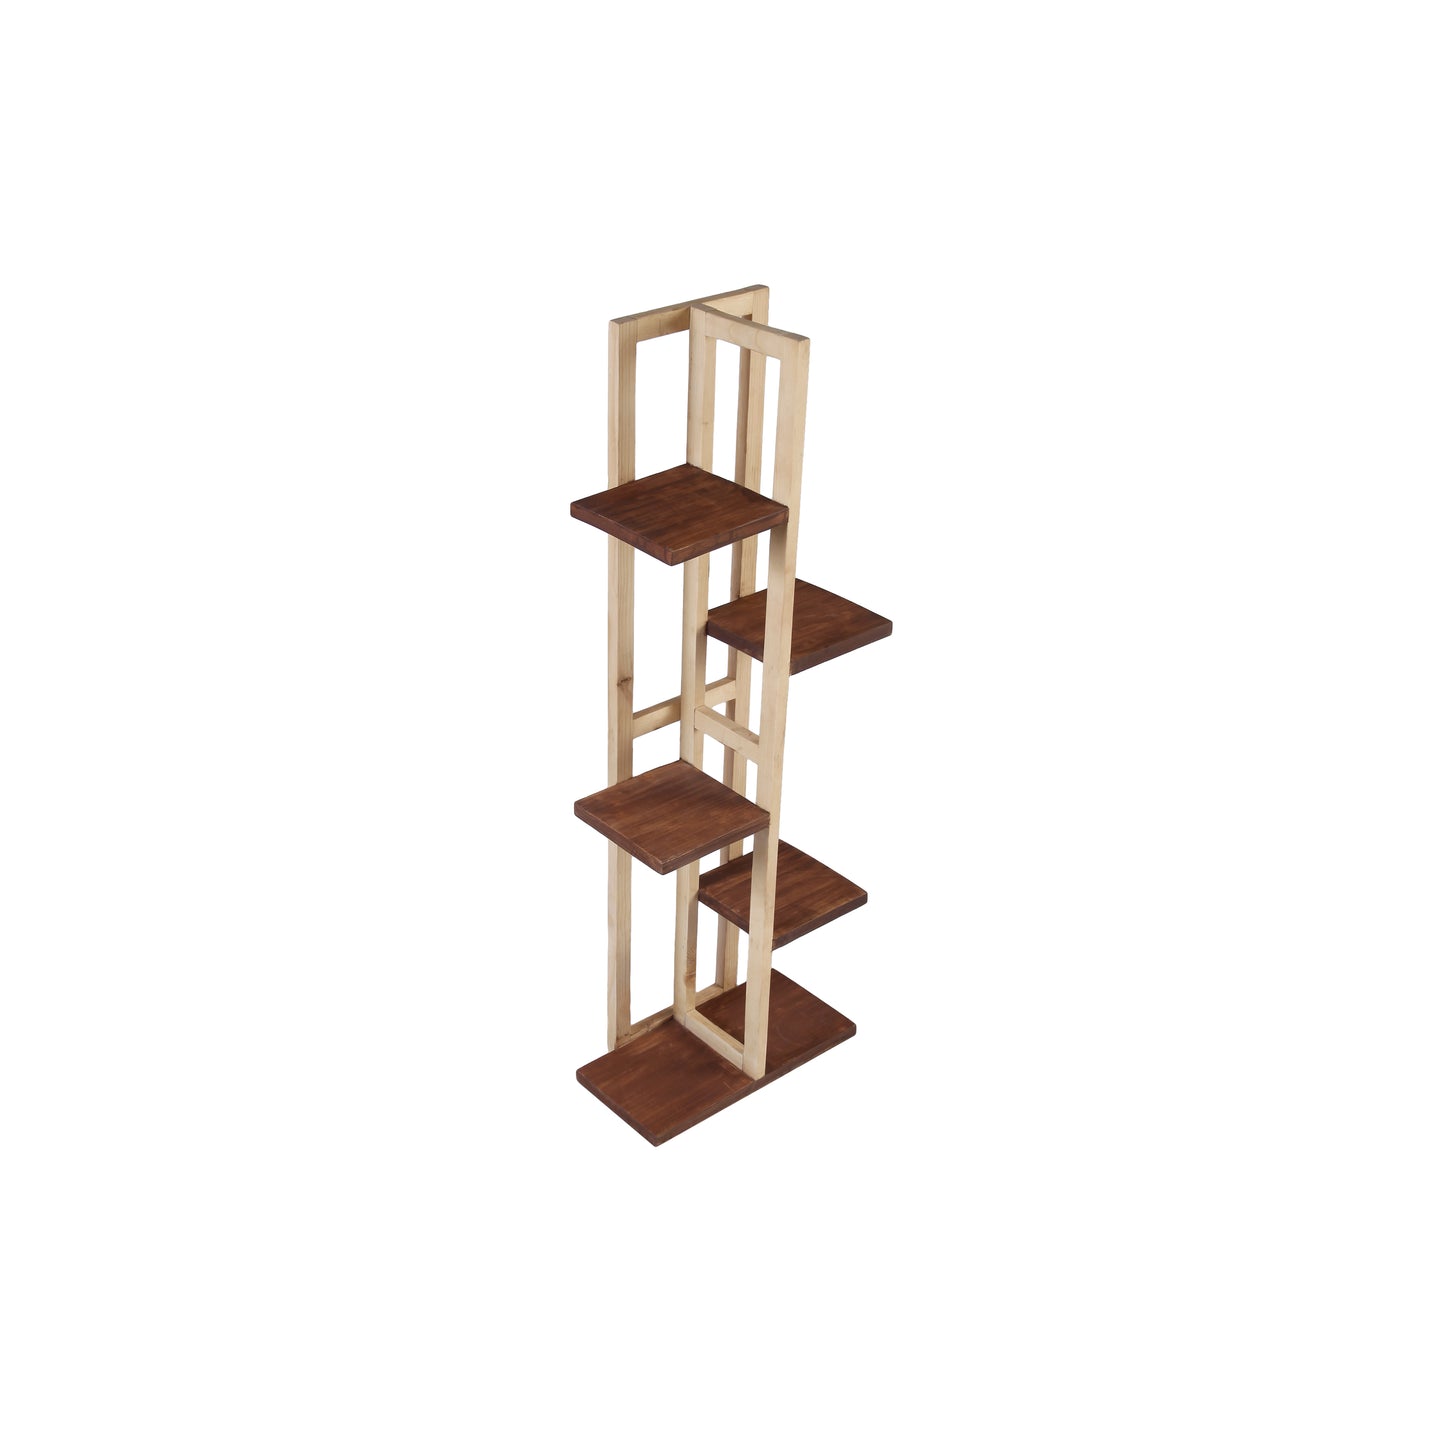 A Tiny Mistake All Purpose Three Tier Stand (One Piece) (For Planters, Ornaments and Accessories) (Natural Pine Wood Stand with Dark Planks)